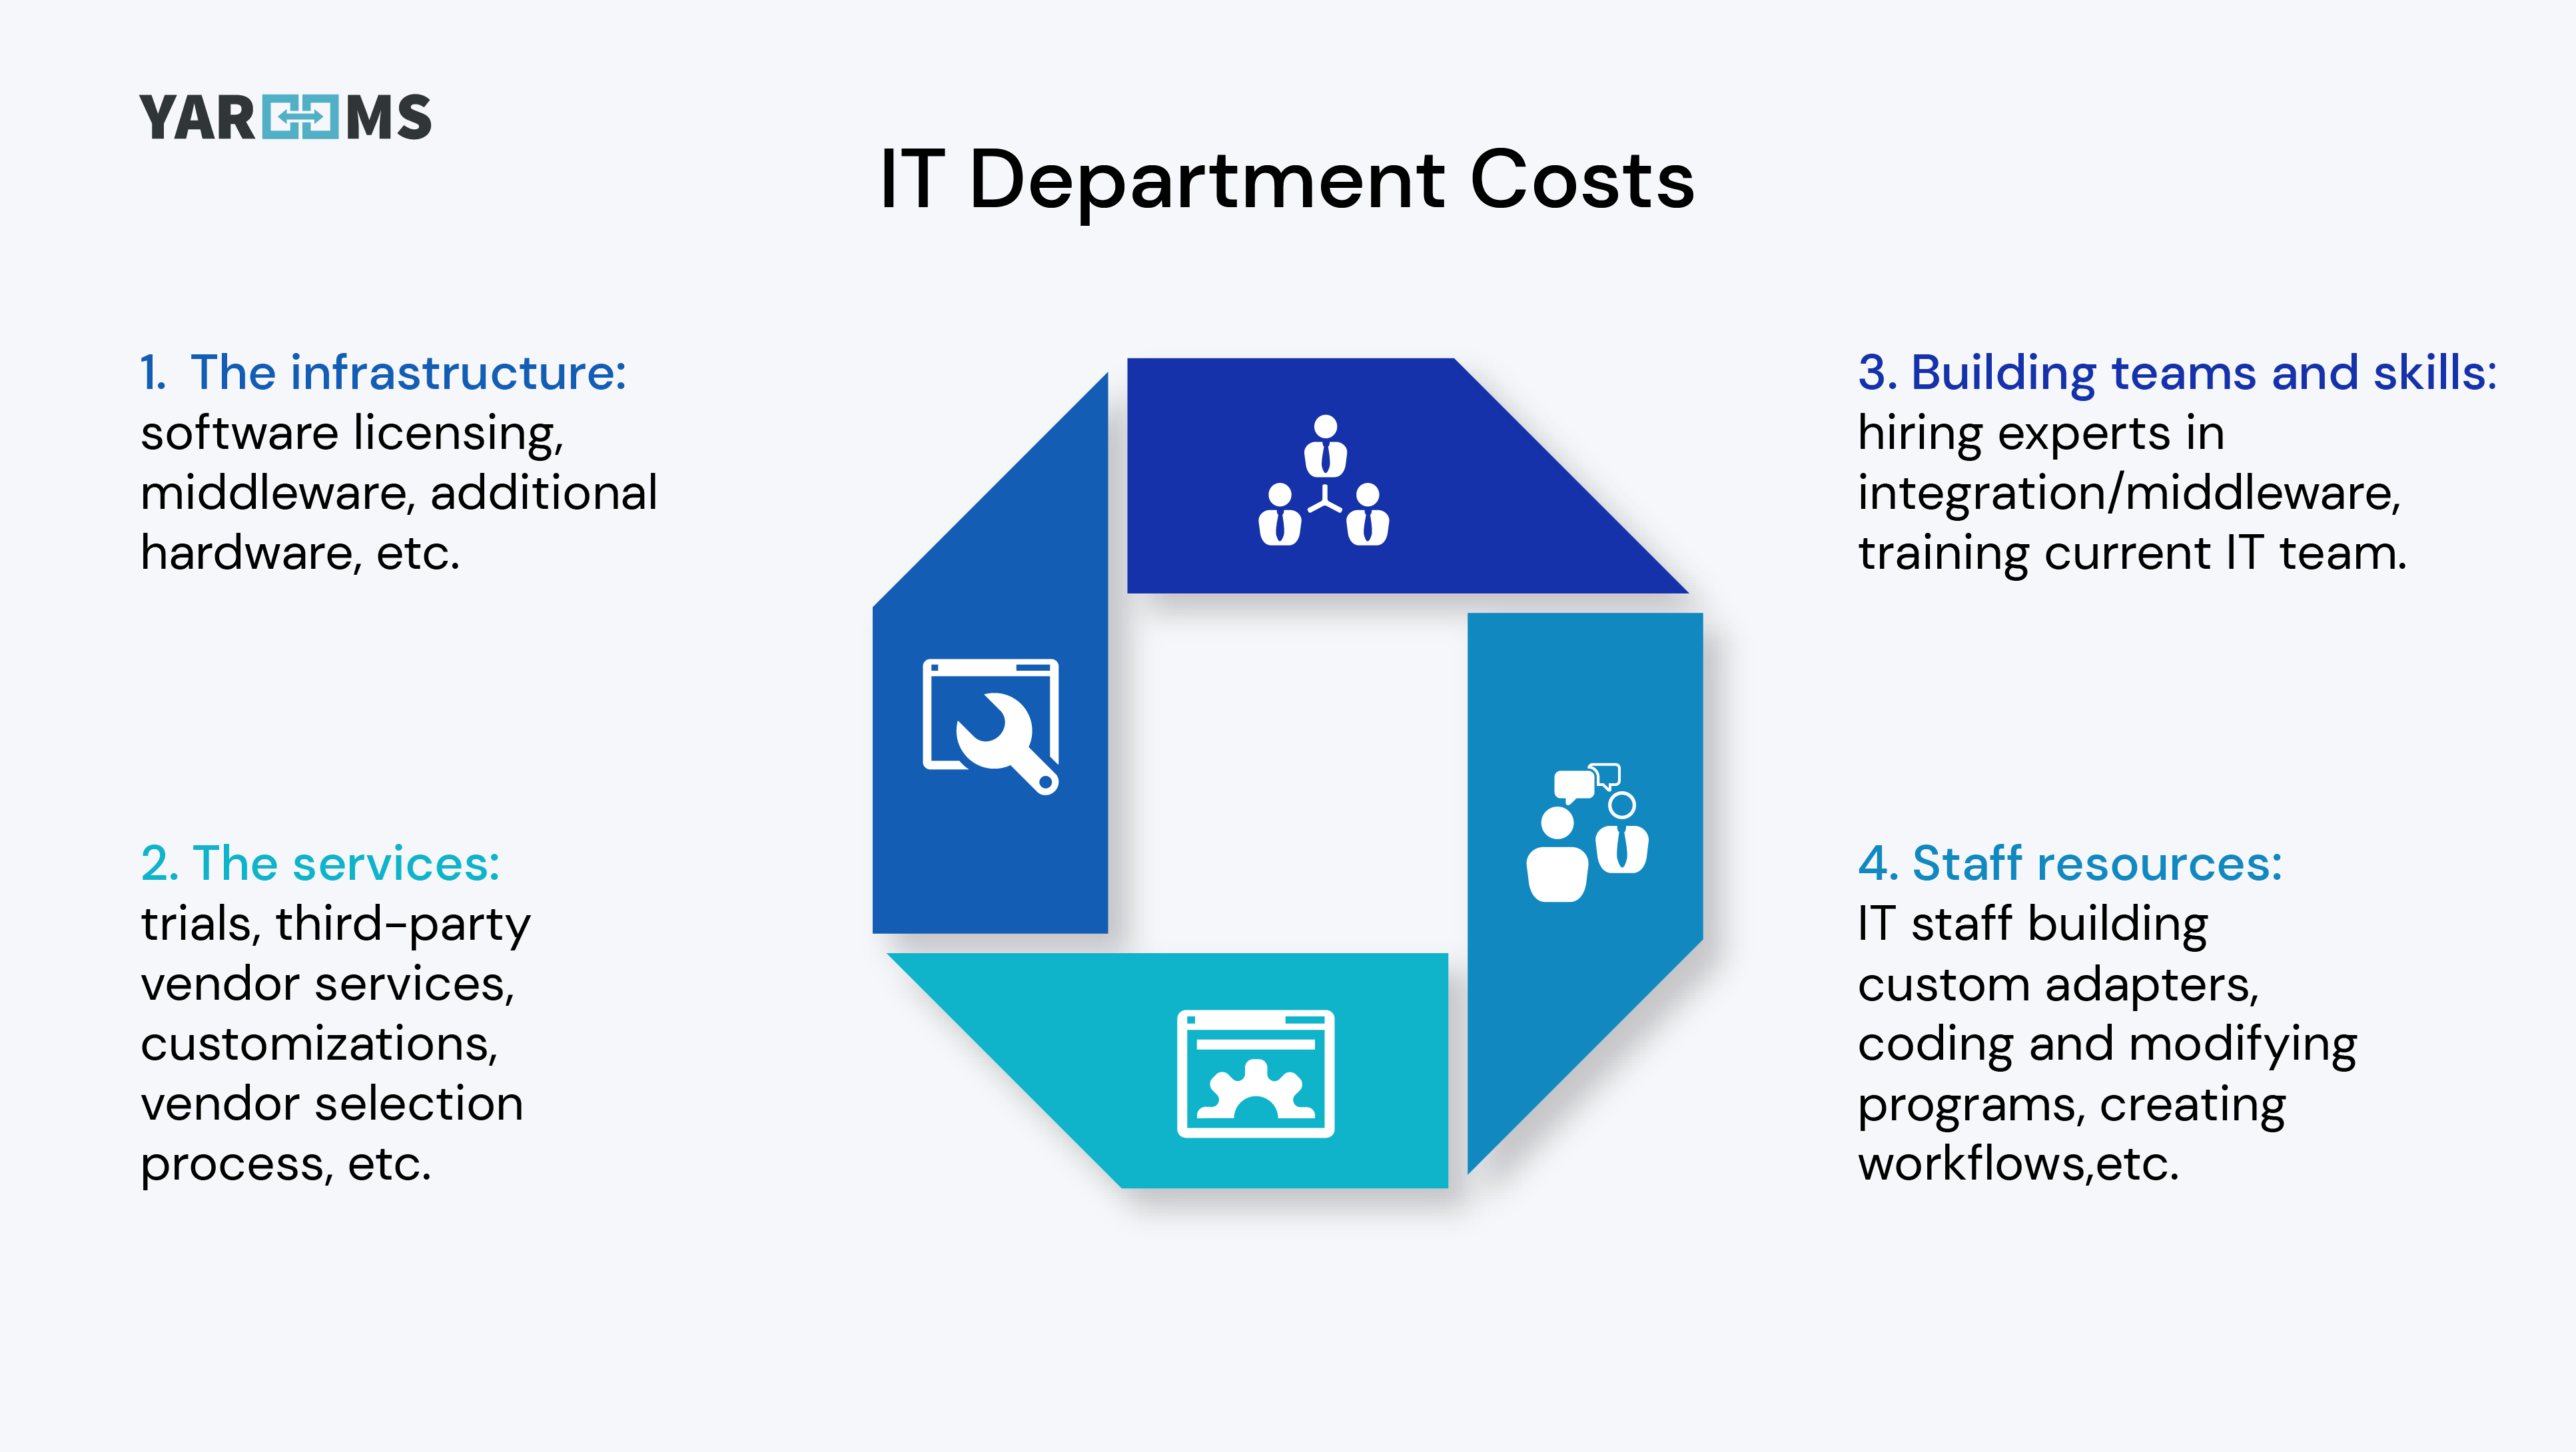 IT departments costs